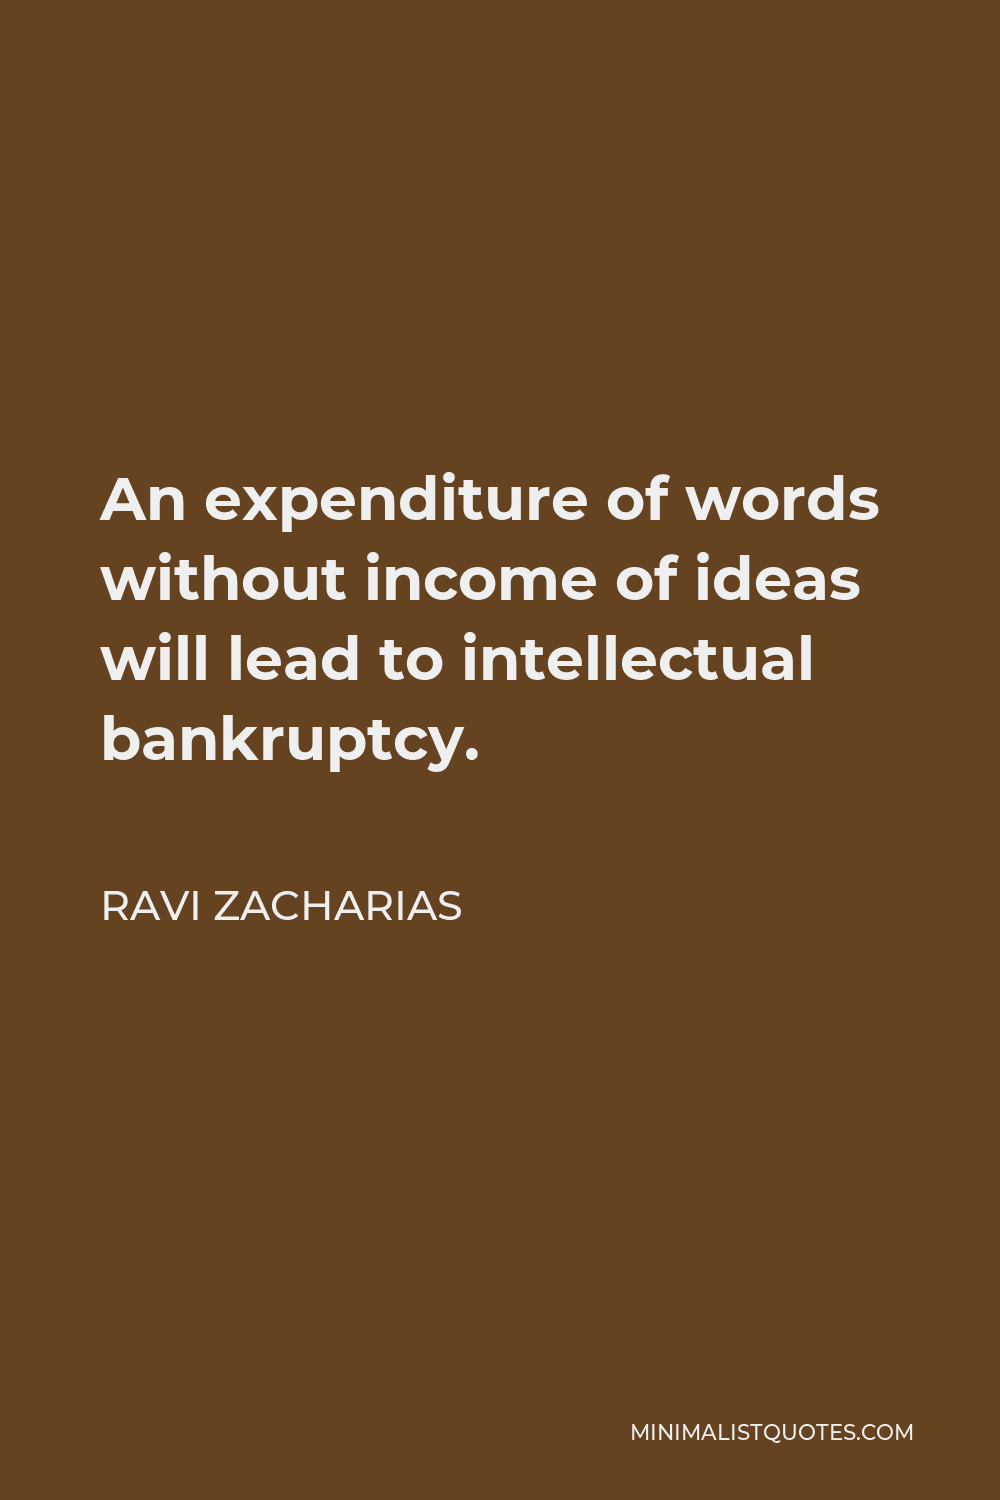 Ravi Zacharias Quote - An expenditure of words without income of ideas will lead to intellectual bankruptcy.